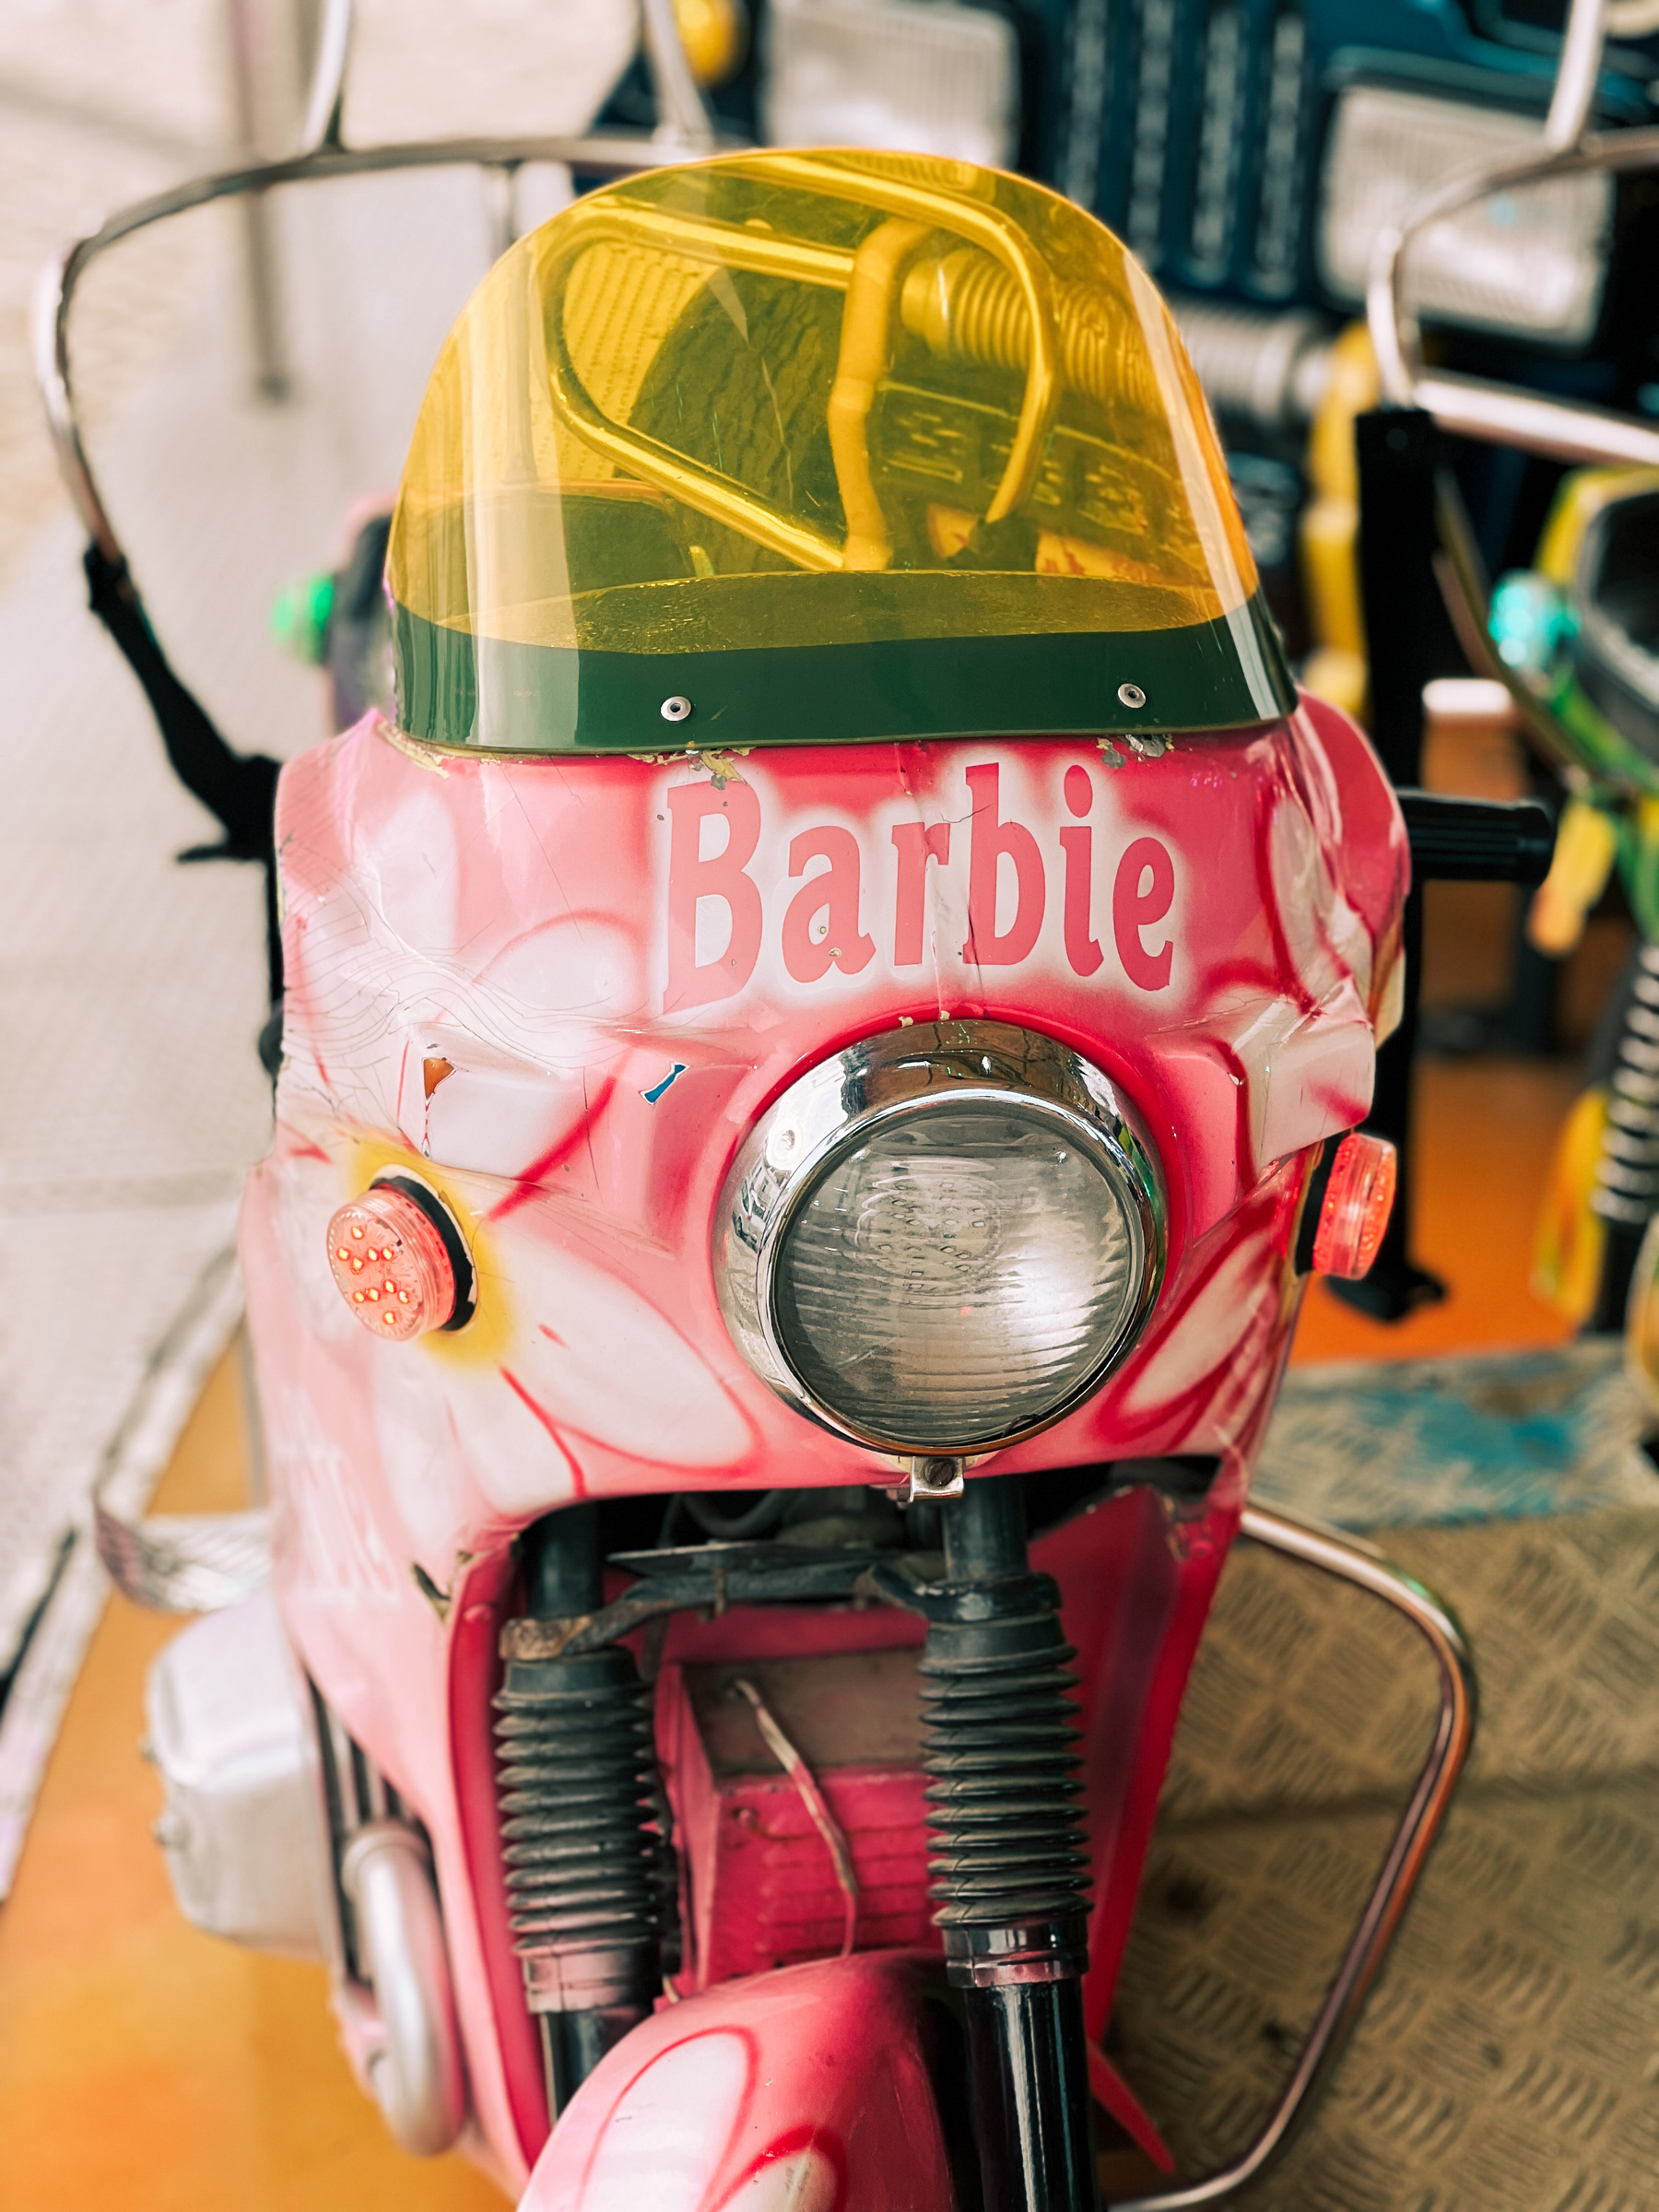 A toy motorcycle with a Barbie paint job. 